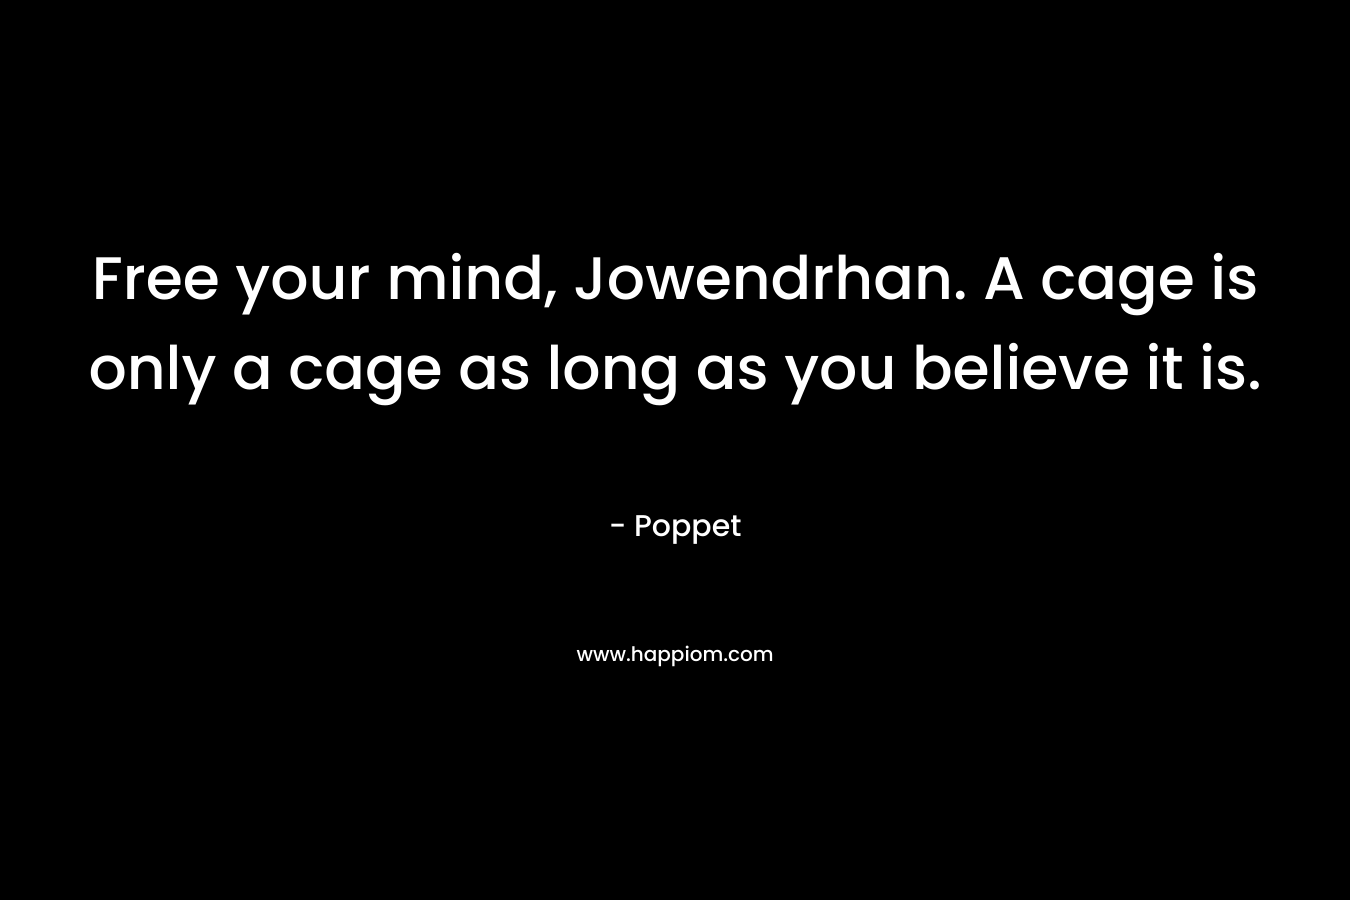 Free your mind, Jowendrhan. A cage is only a cage as long as you believe it is. – Poppet